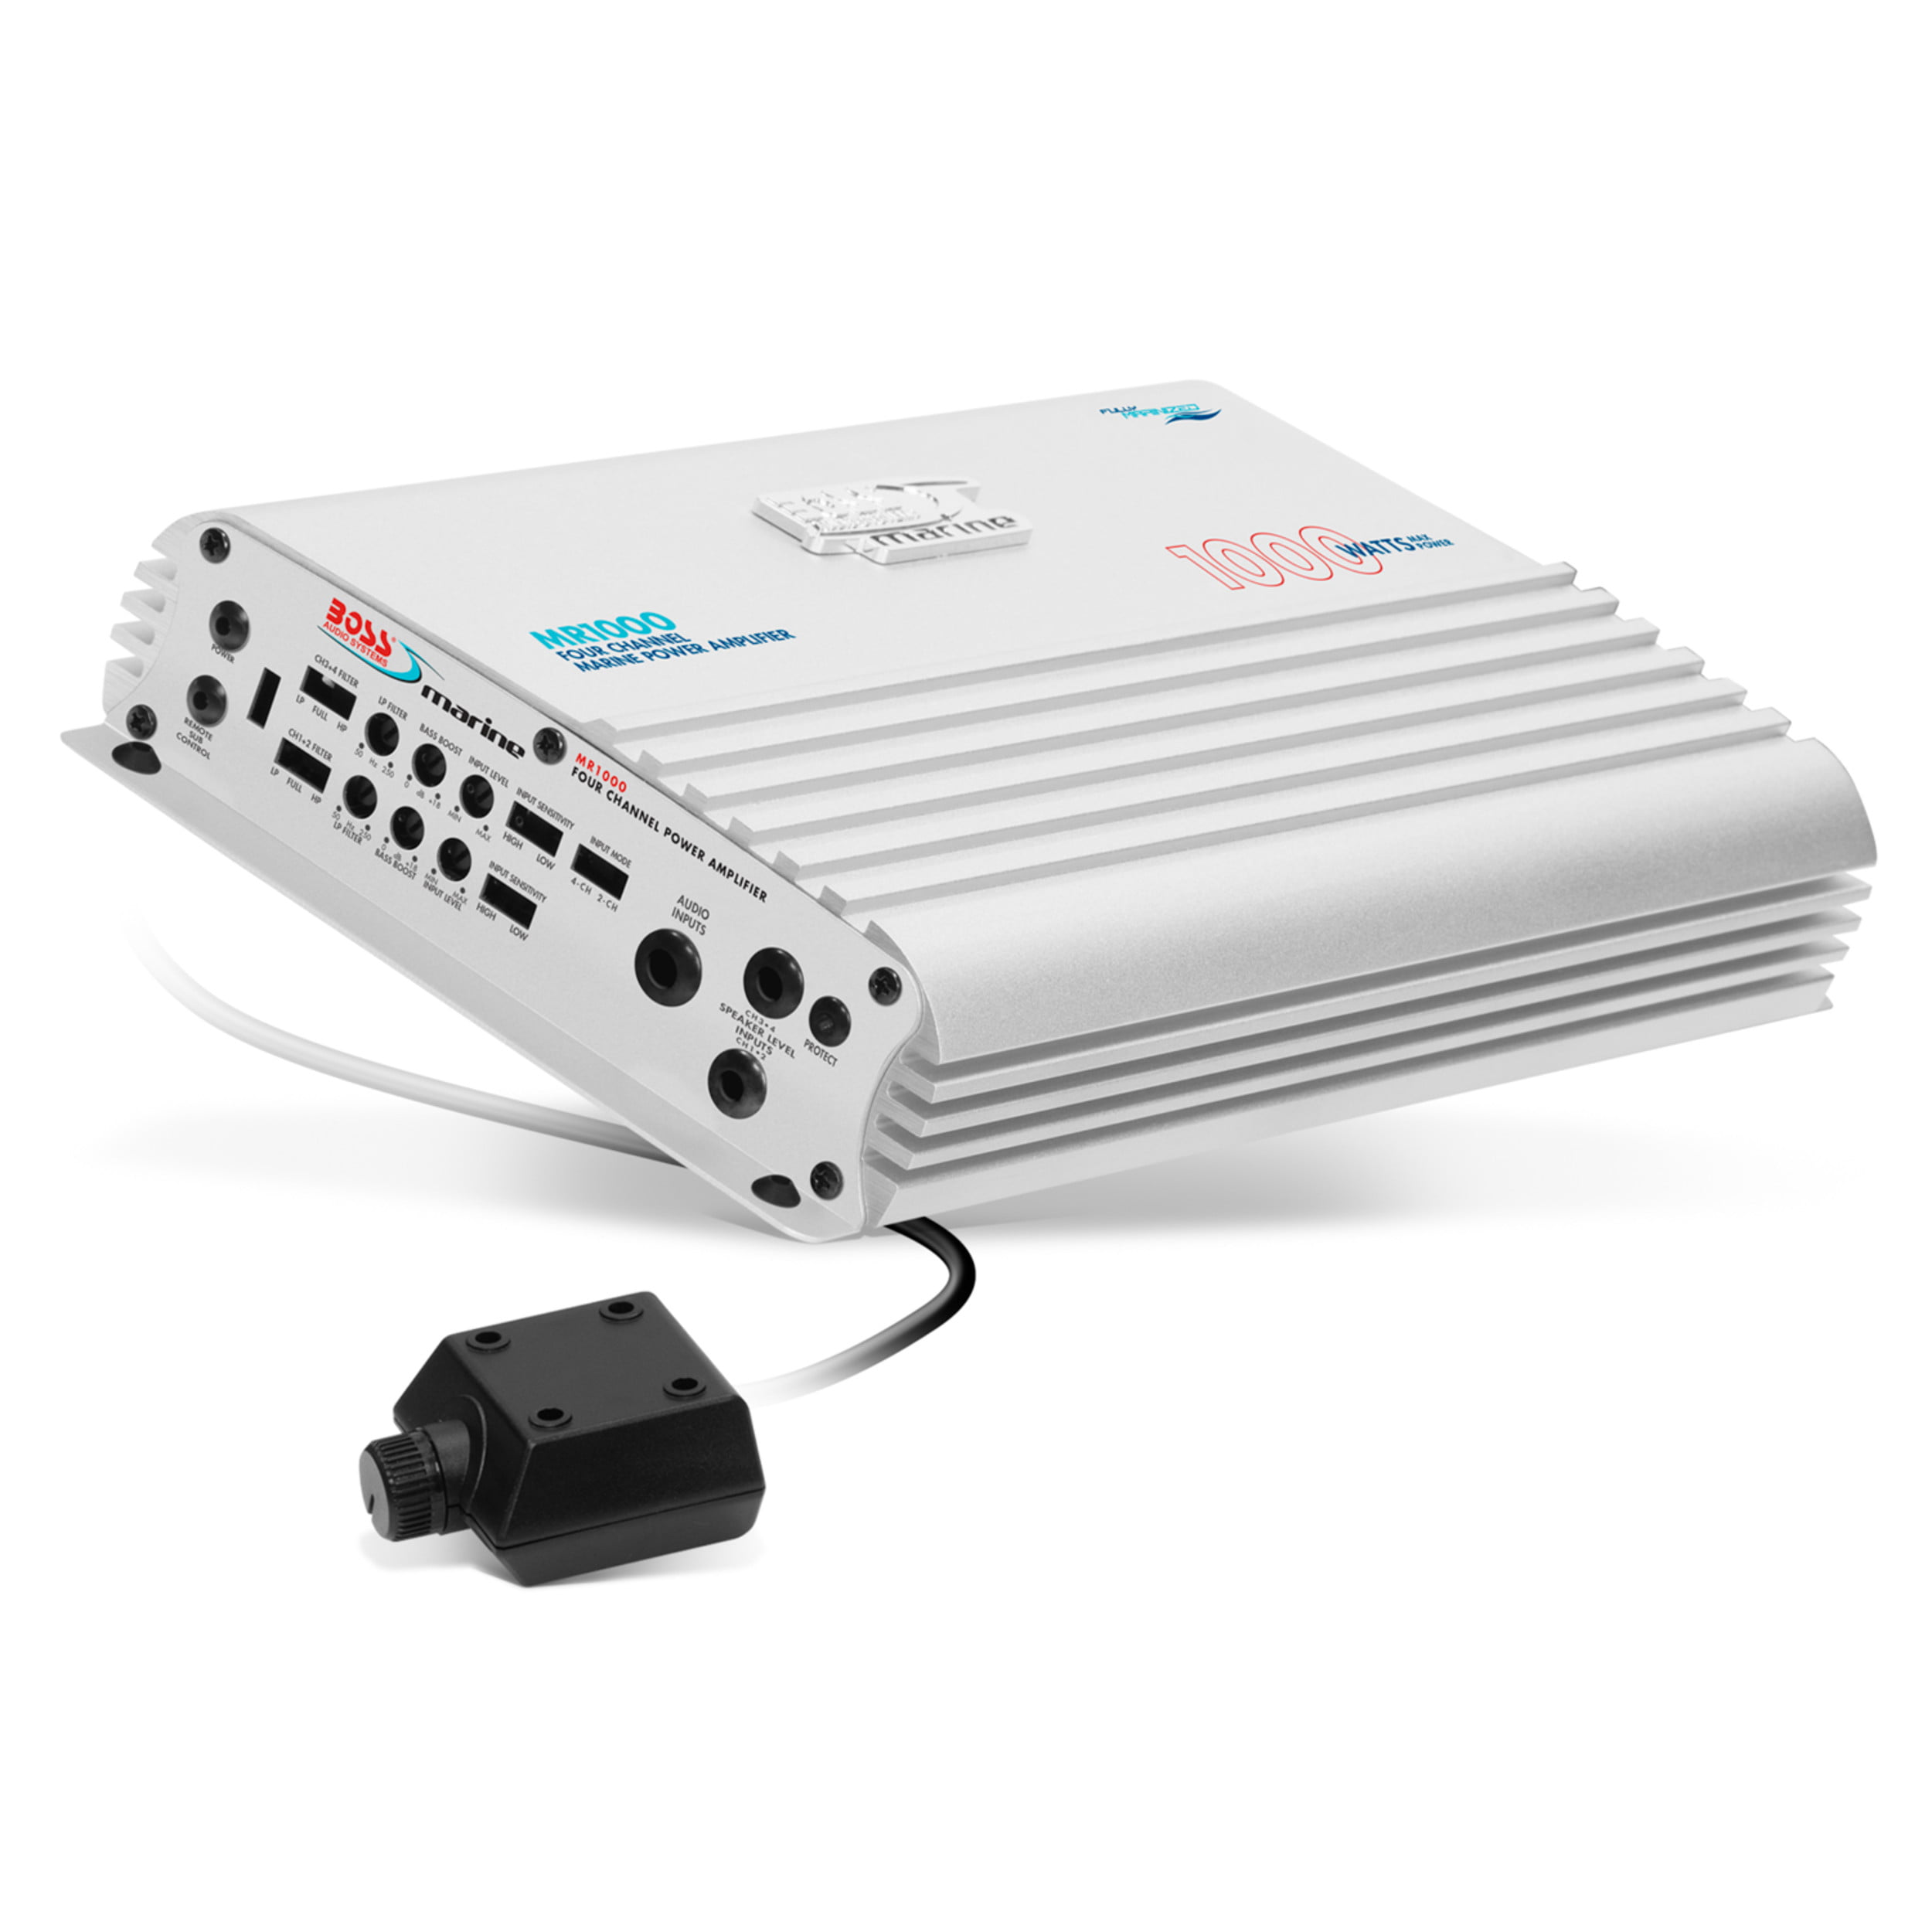 NEW 2Channel Speaker Amplifier.Compact Amp.Power.Car Stereo Audio.ATV boat.1000w 